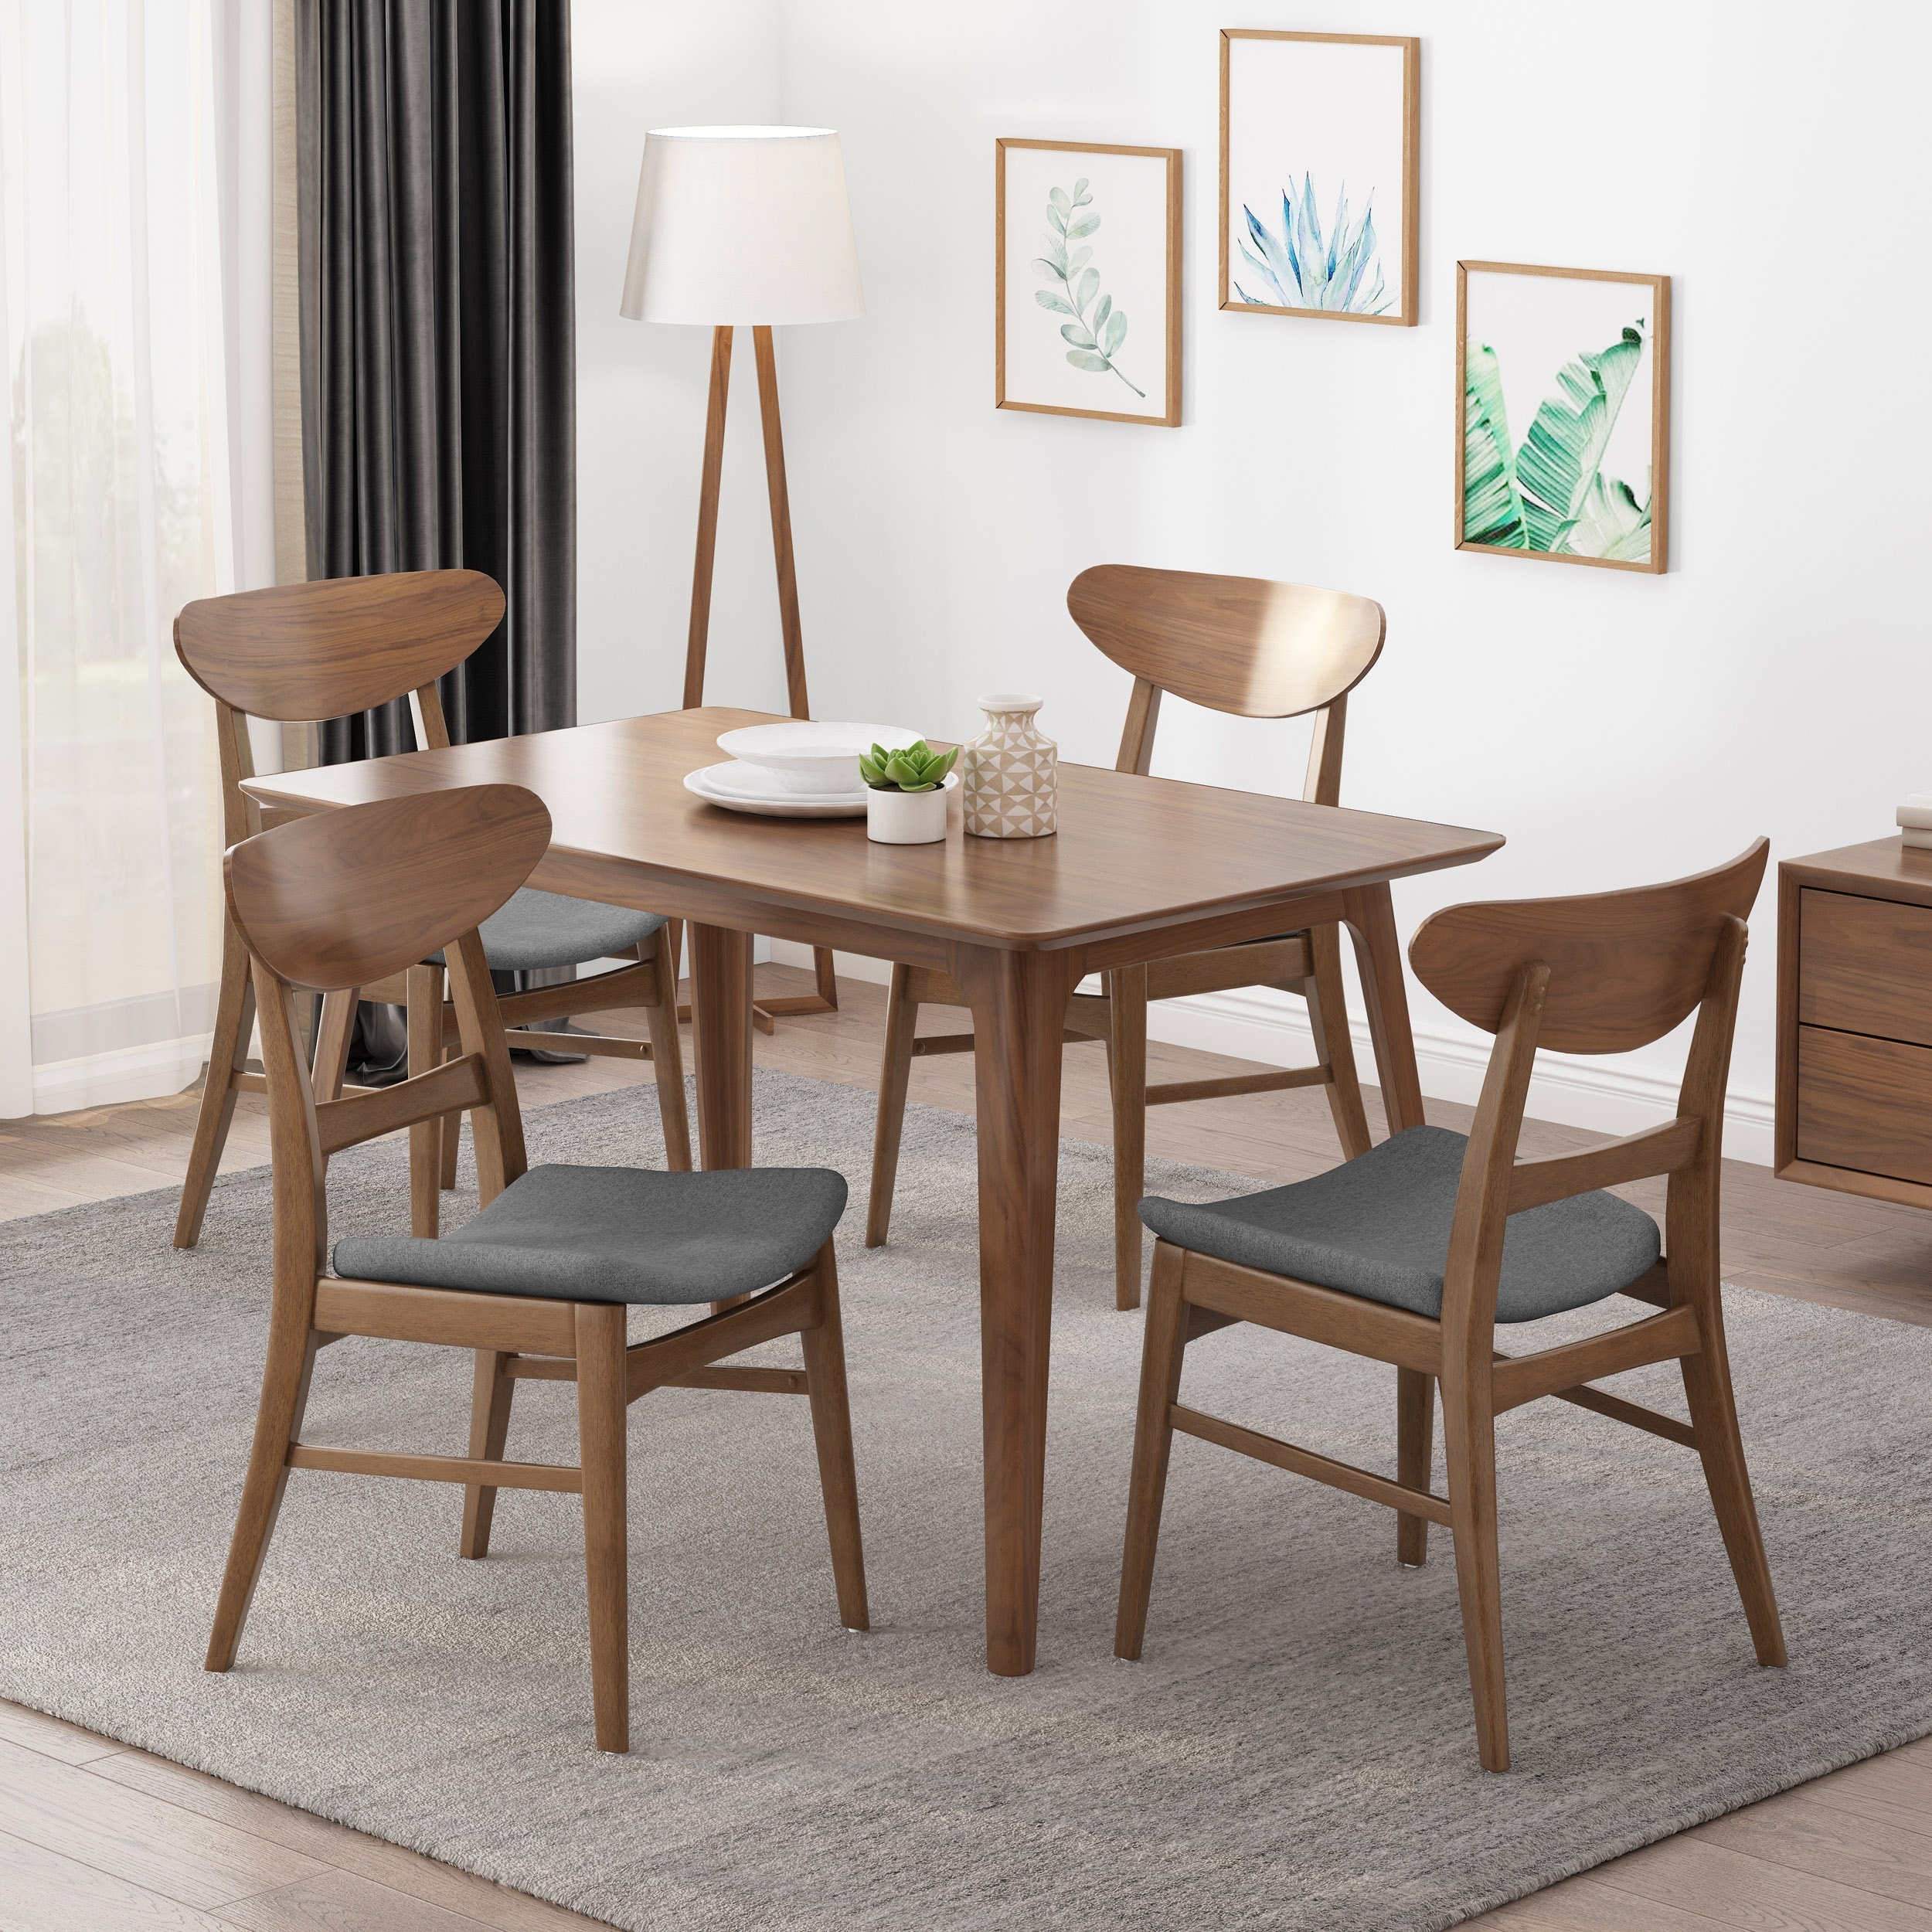 Idalia Mid-century Modern Dining Chairs (Set of 4) by Christopher Knight  Home